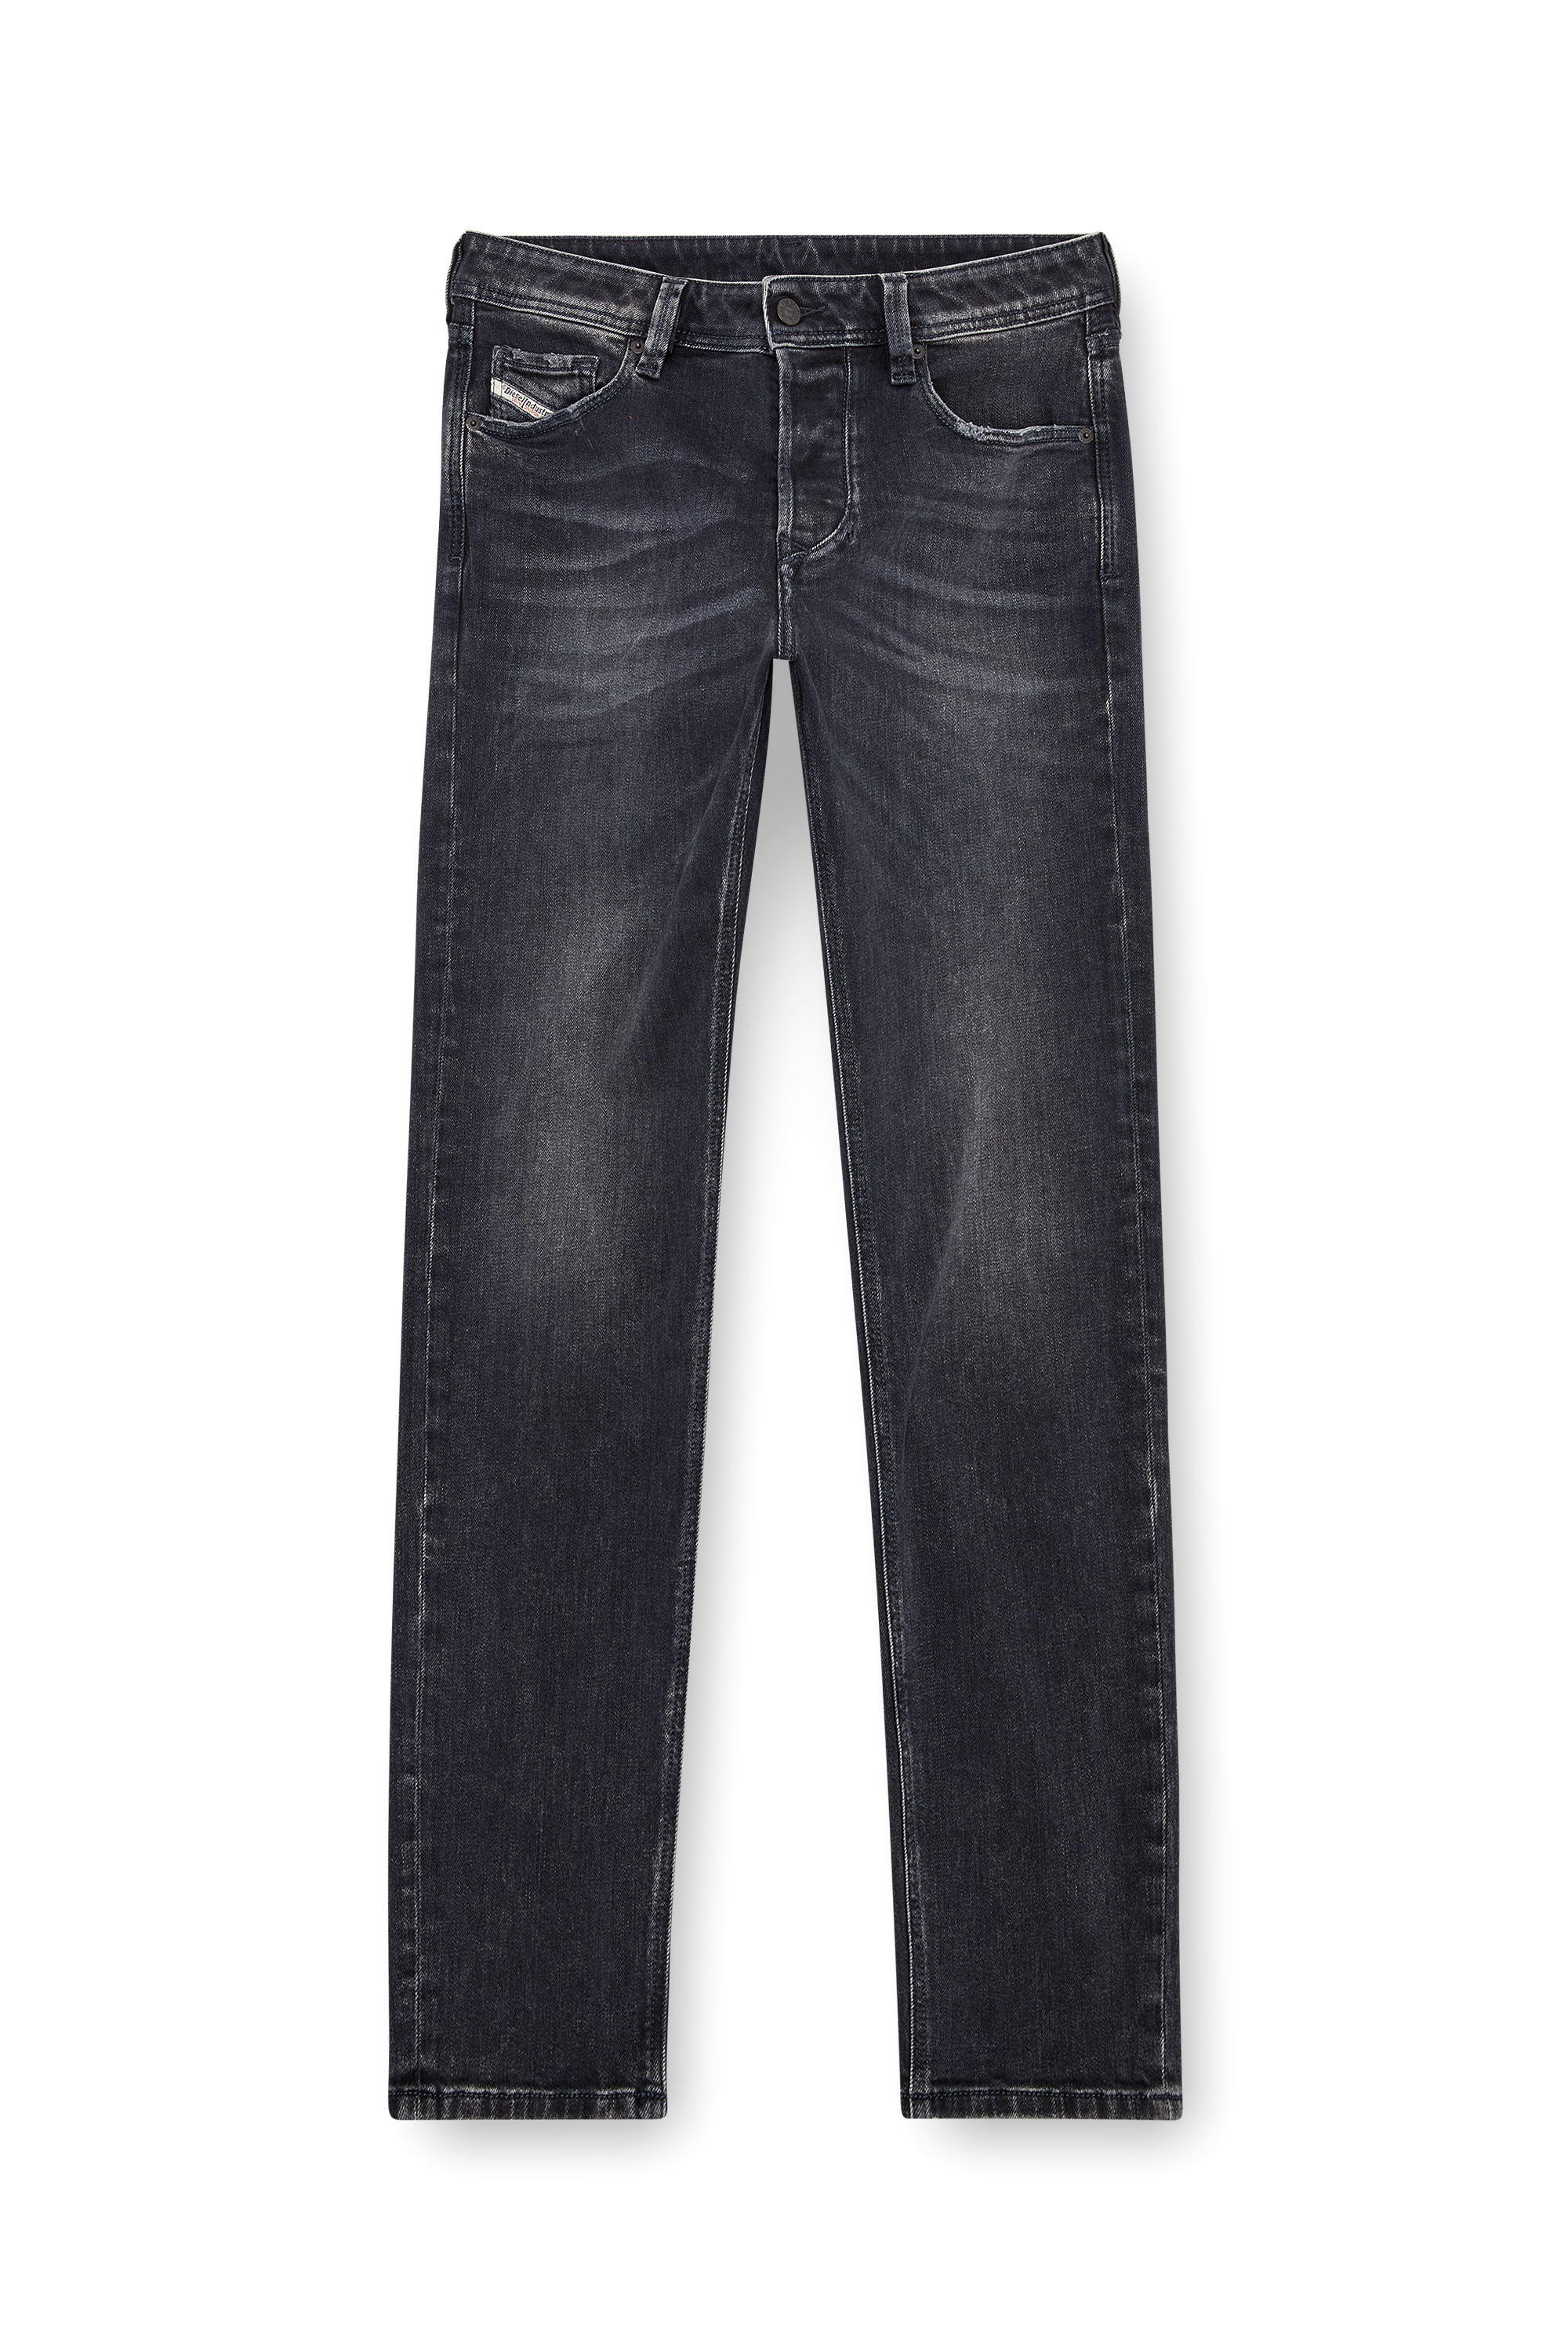 Diesel - Tapered Jeans 1986 Larkee-Beex 09K51, Hombre Tapered Jeans - 1986 Larkee-Beex in Negro - Image 3